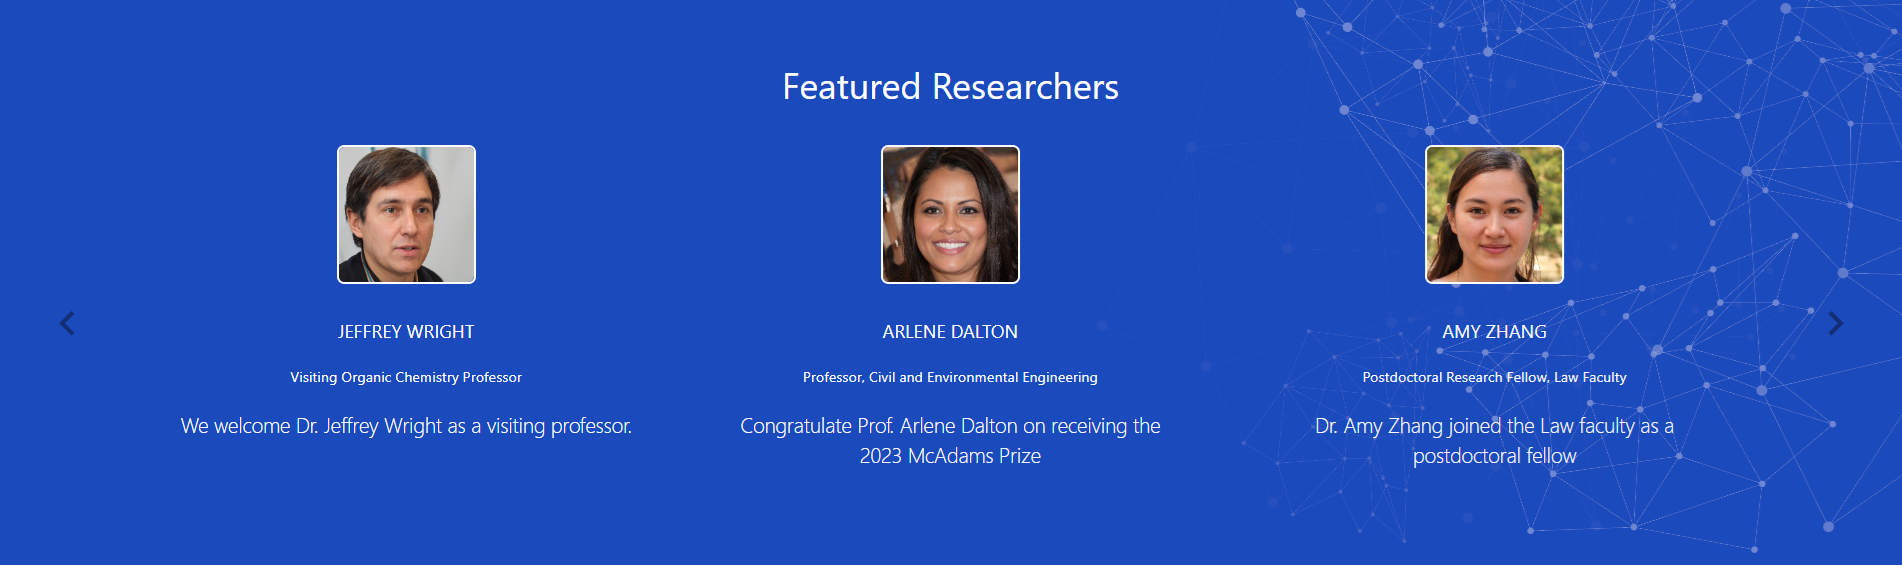 Featured researchers.